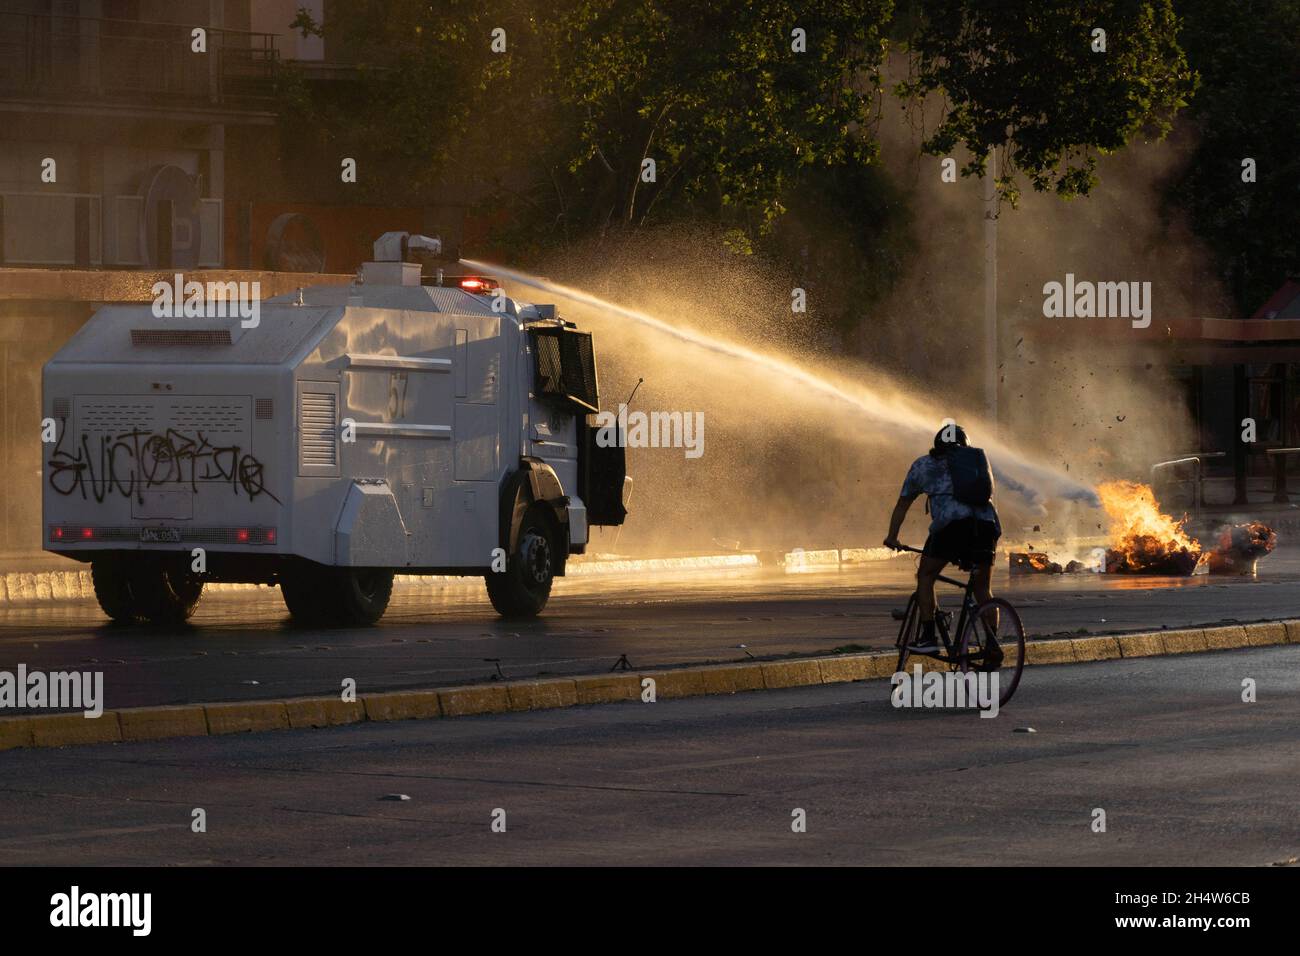 Santiago, Metropolitana, Chile. 4th Nov, 2021. Police use the water cannon to put out a barricade during protests against the government of Sebastian Pinera, in Santiago, Chile. The protests come after the death of a Mapuche person during clashes in the southern region of Bio Bio after the Chilean government declared a state of emergency to reduce violence in that area of southern Chile. (Credit Image: © Matias Basualdo/ZUMA Press Wire) Stock Photo